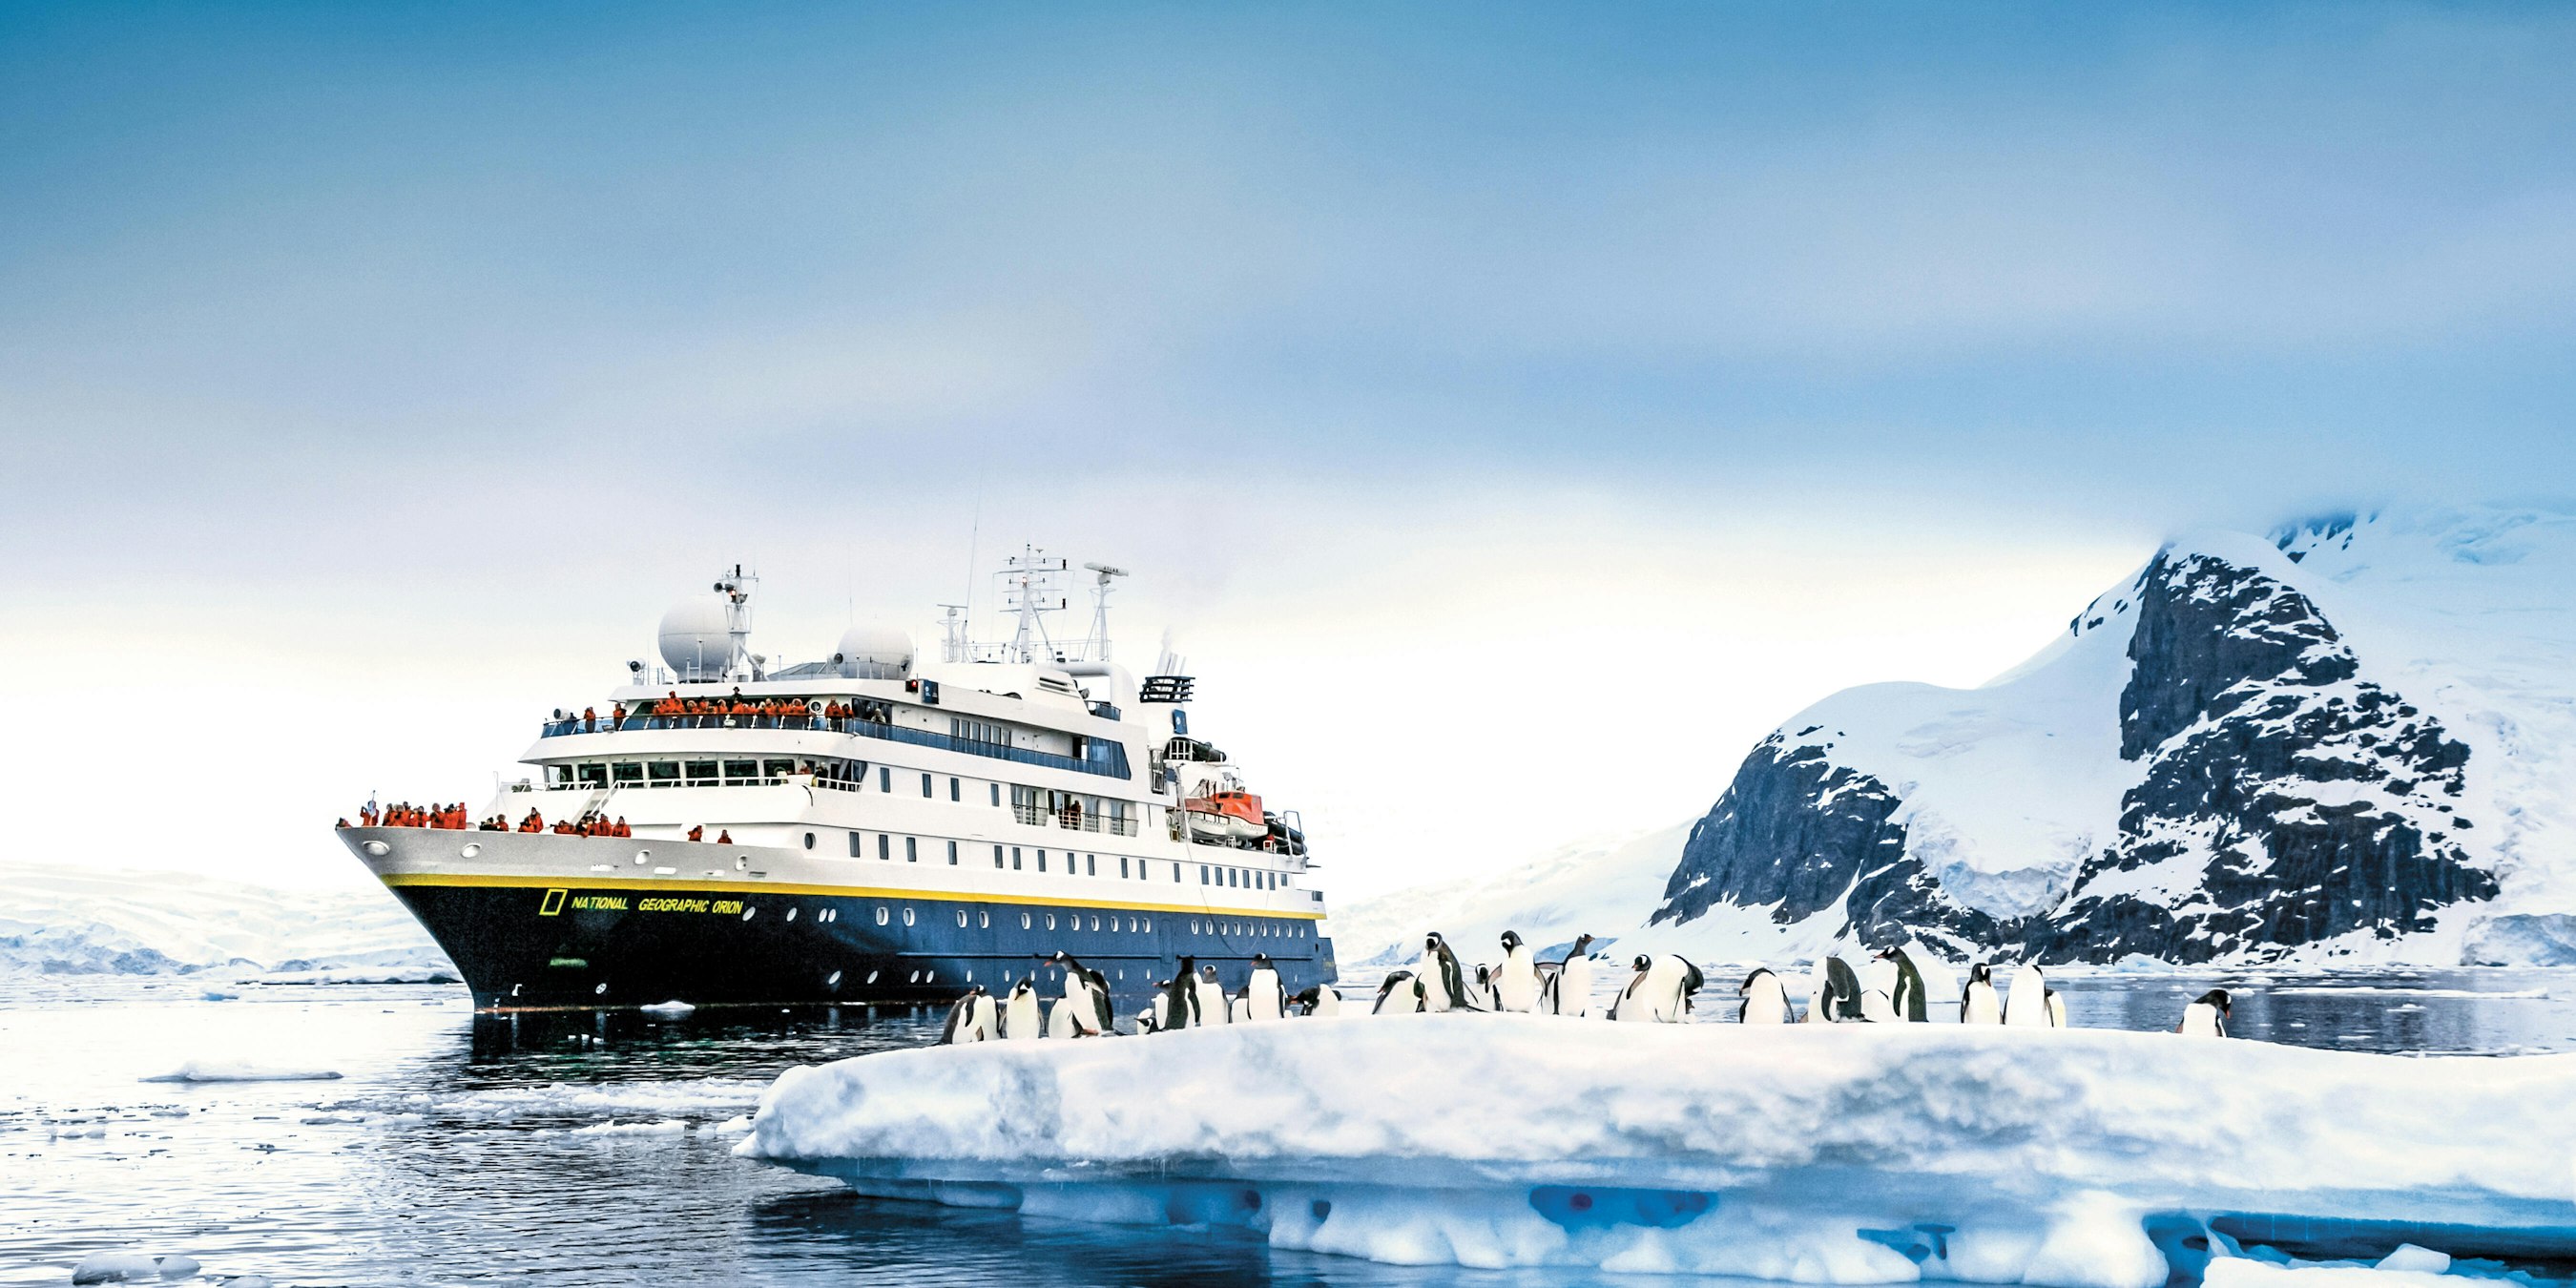 trip to antarctica cost from canada